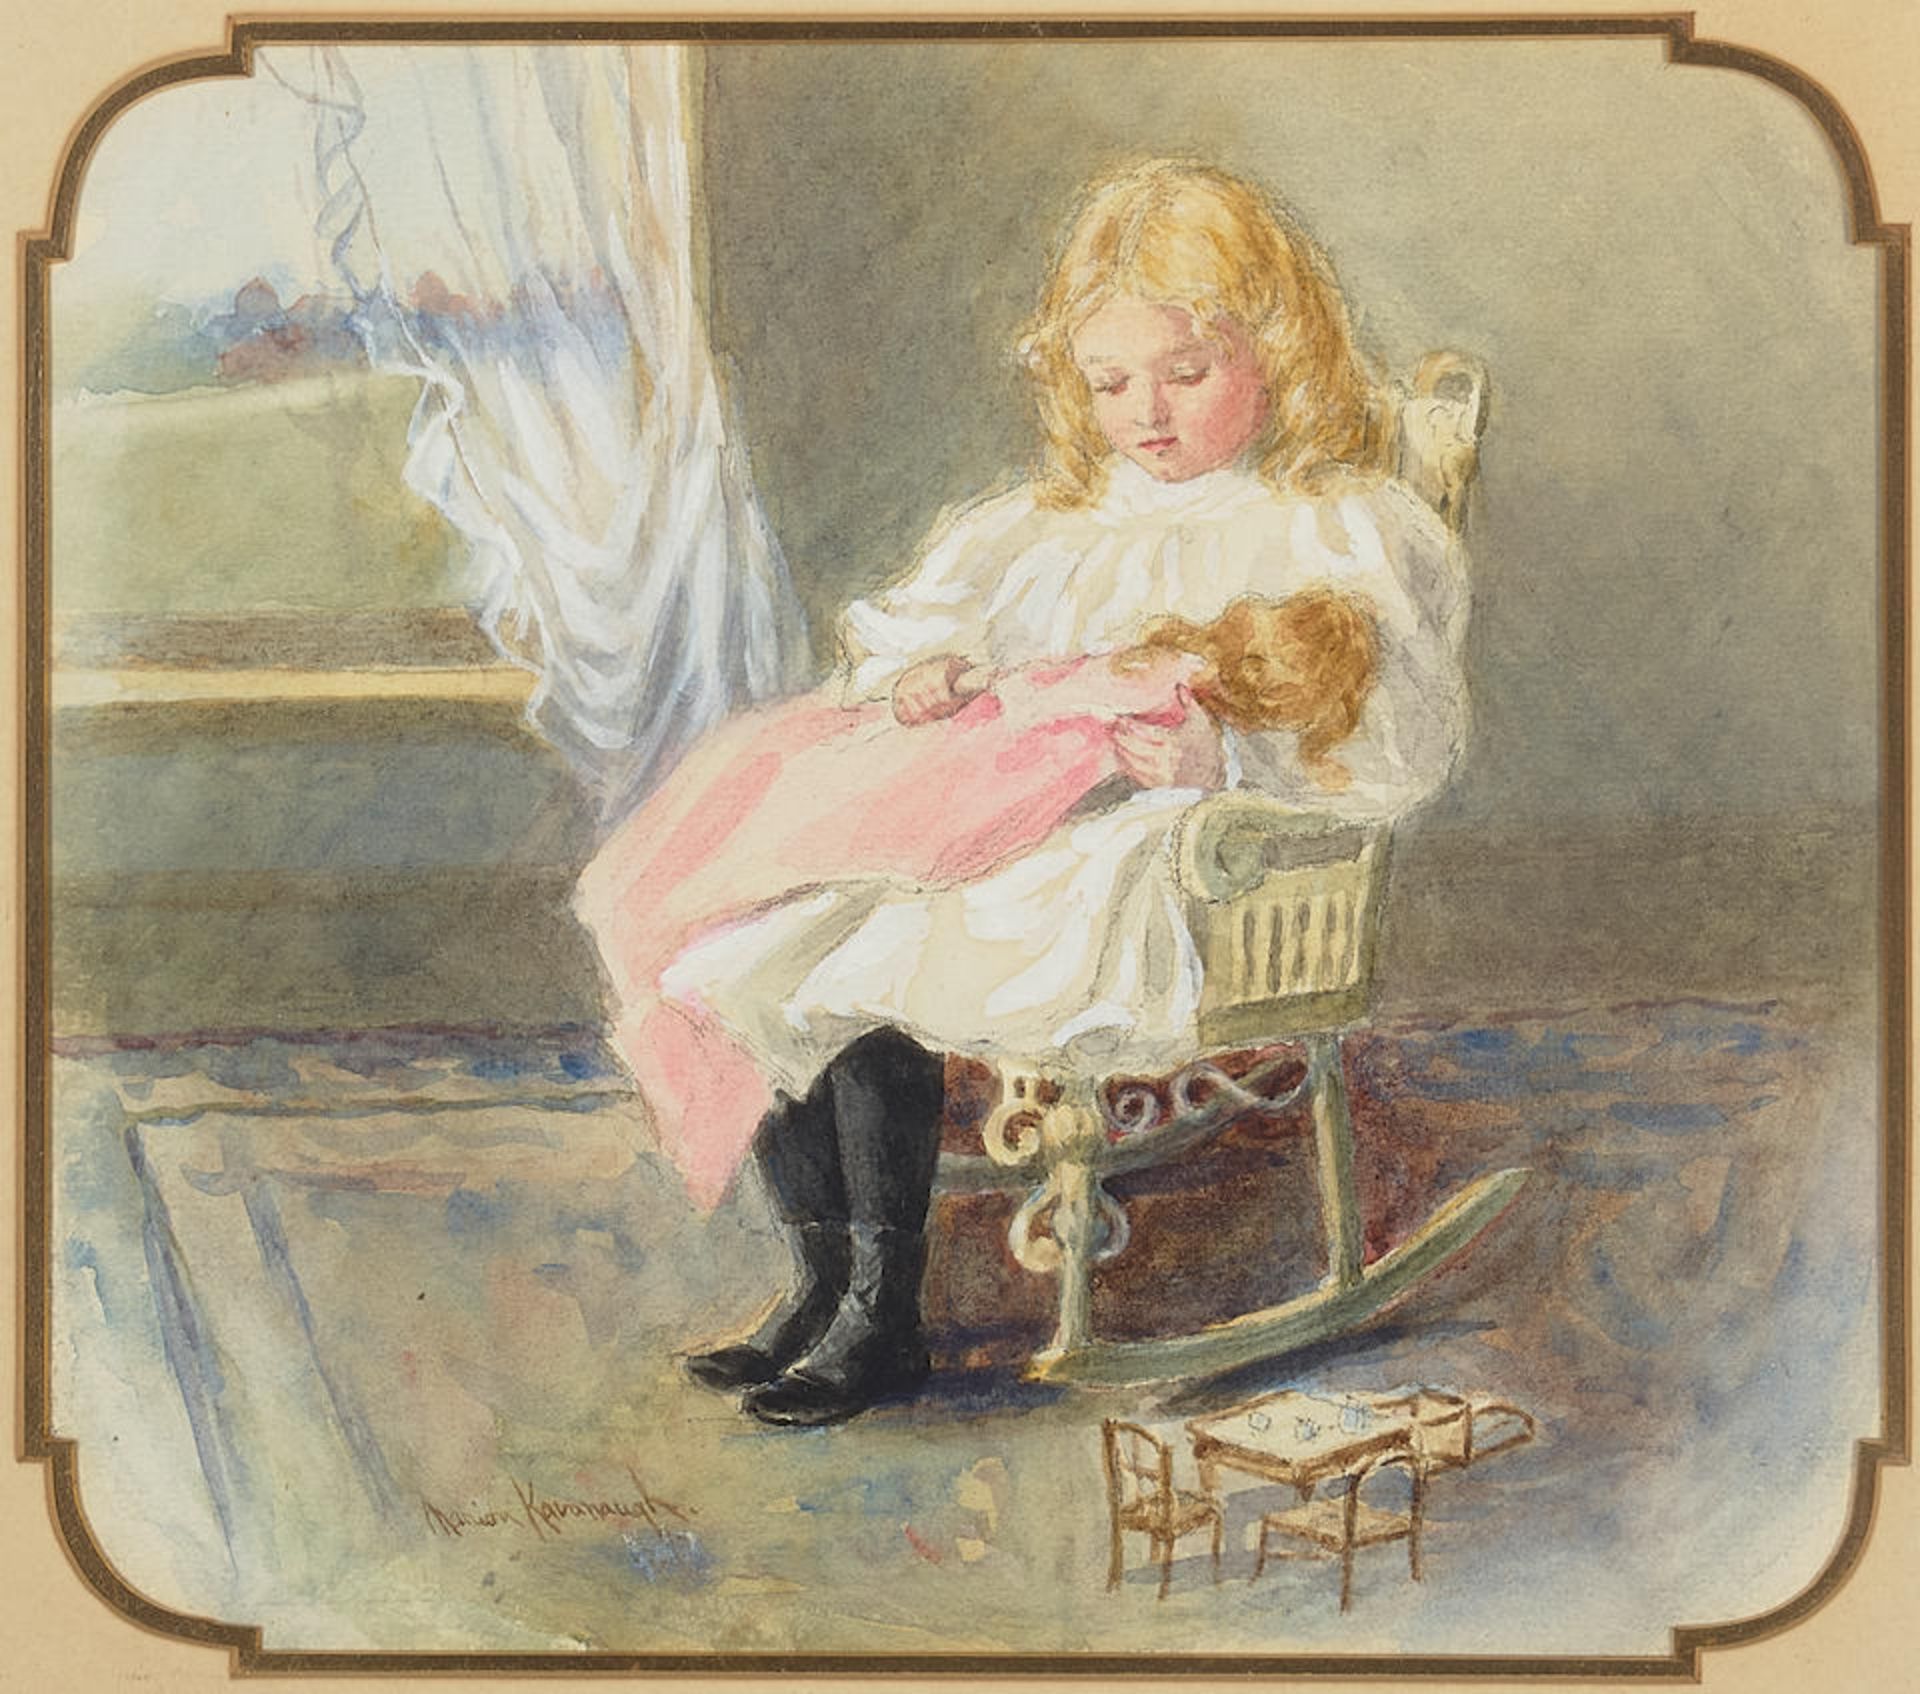 Marion Kavanagh Wachtel (1876-1954) Little Girl with Her Doll sight 8 1/2 x 10 in. framed 15 1/4...